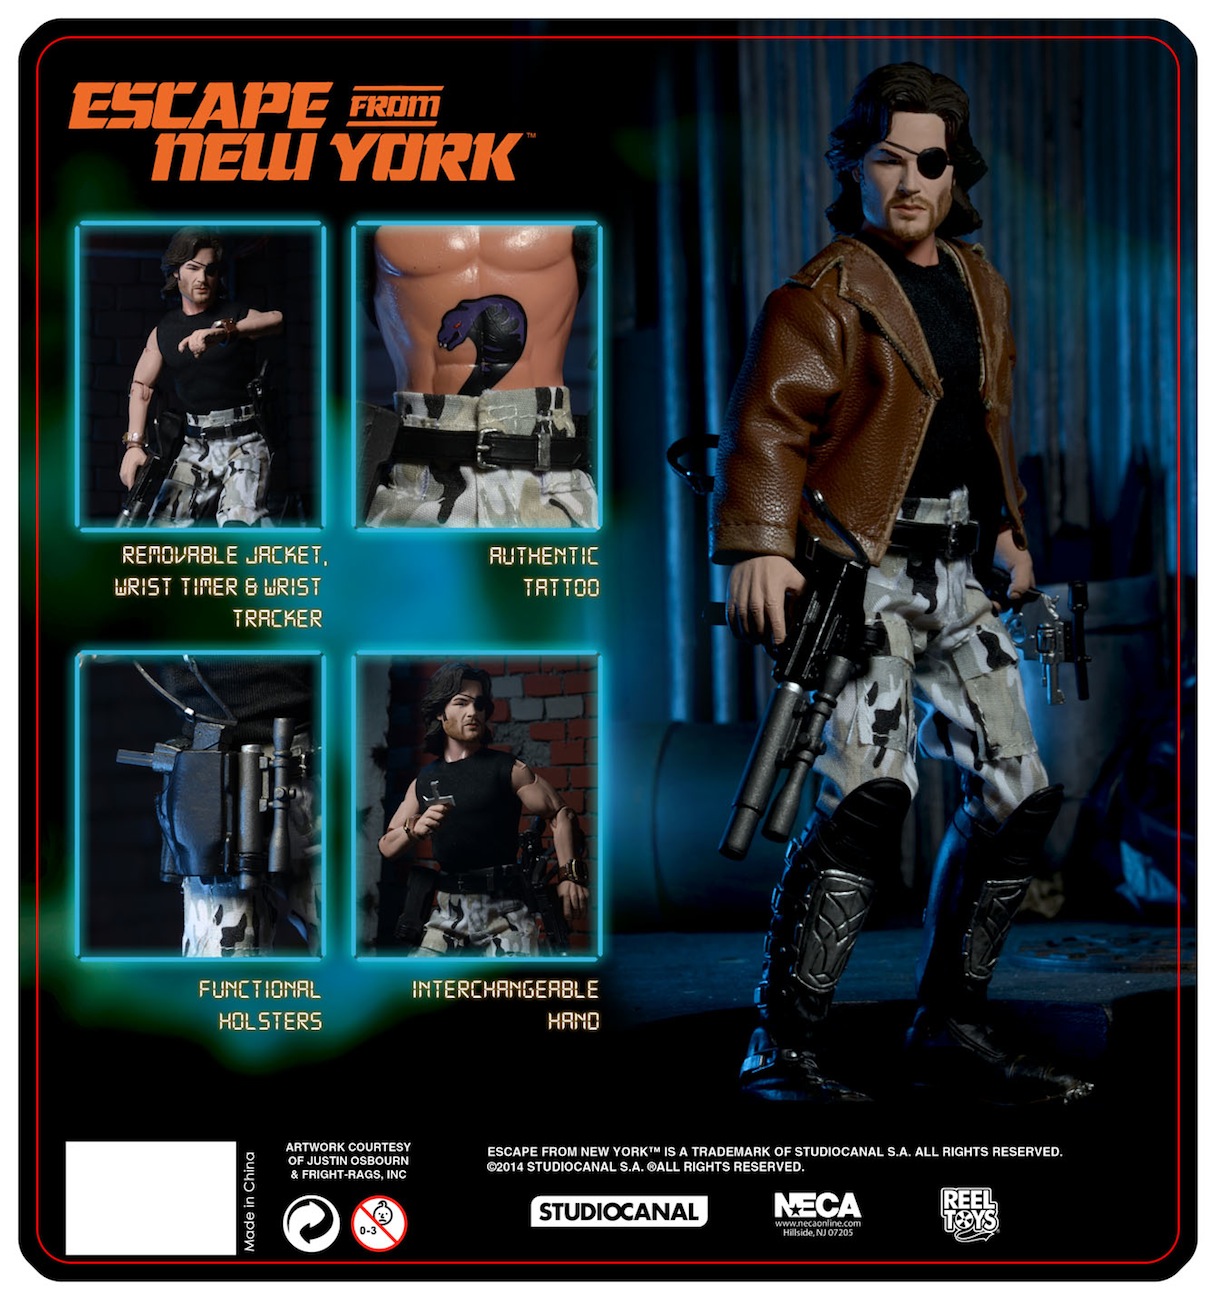 escape from new york action figure